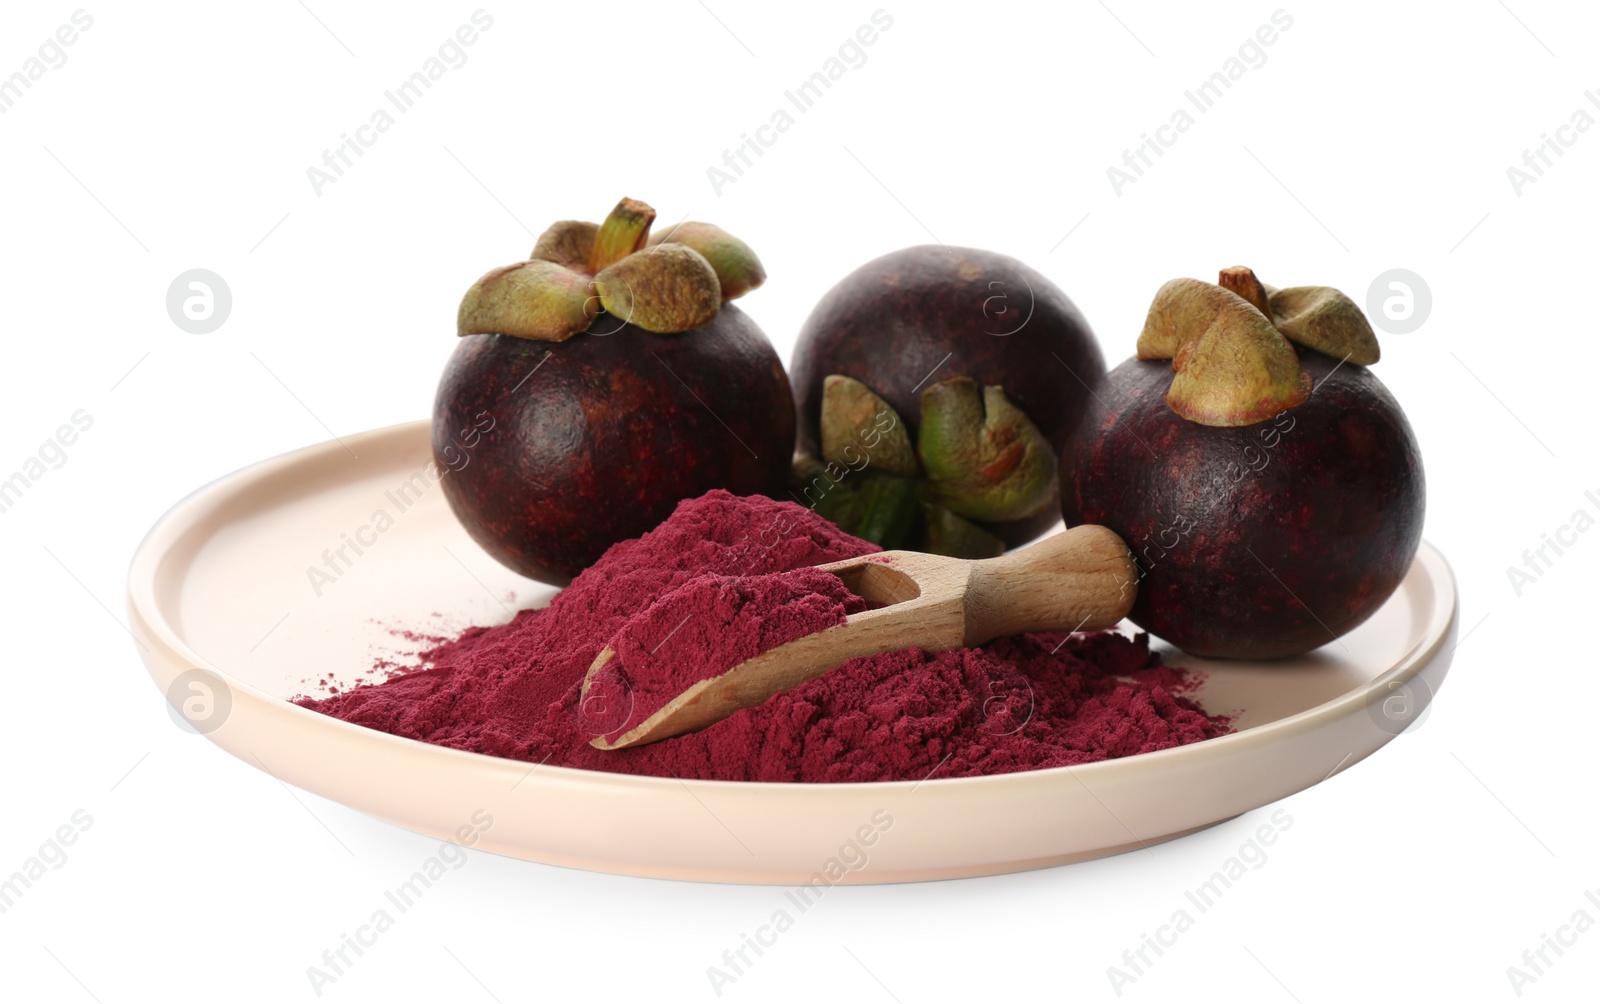 Photo of Mangosteen powder and fruits on white background